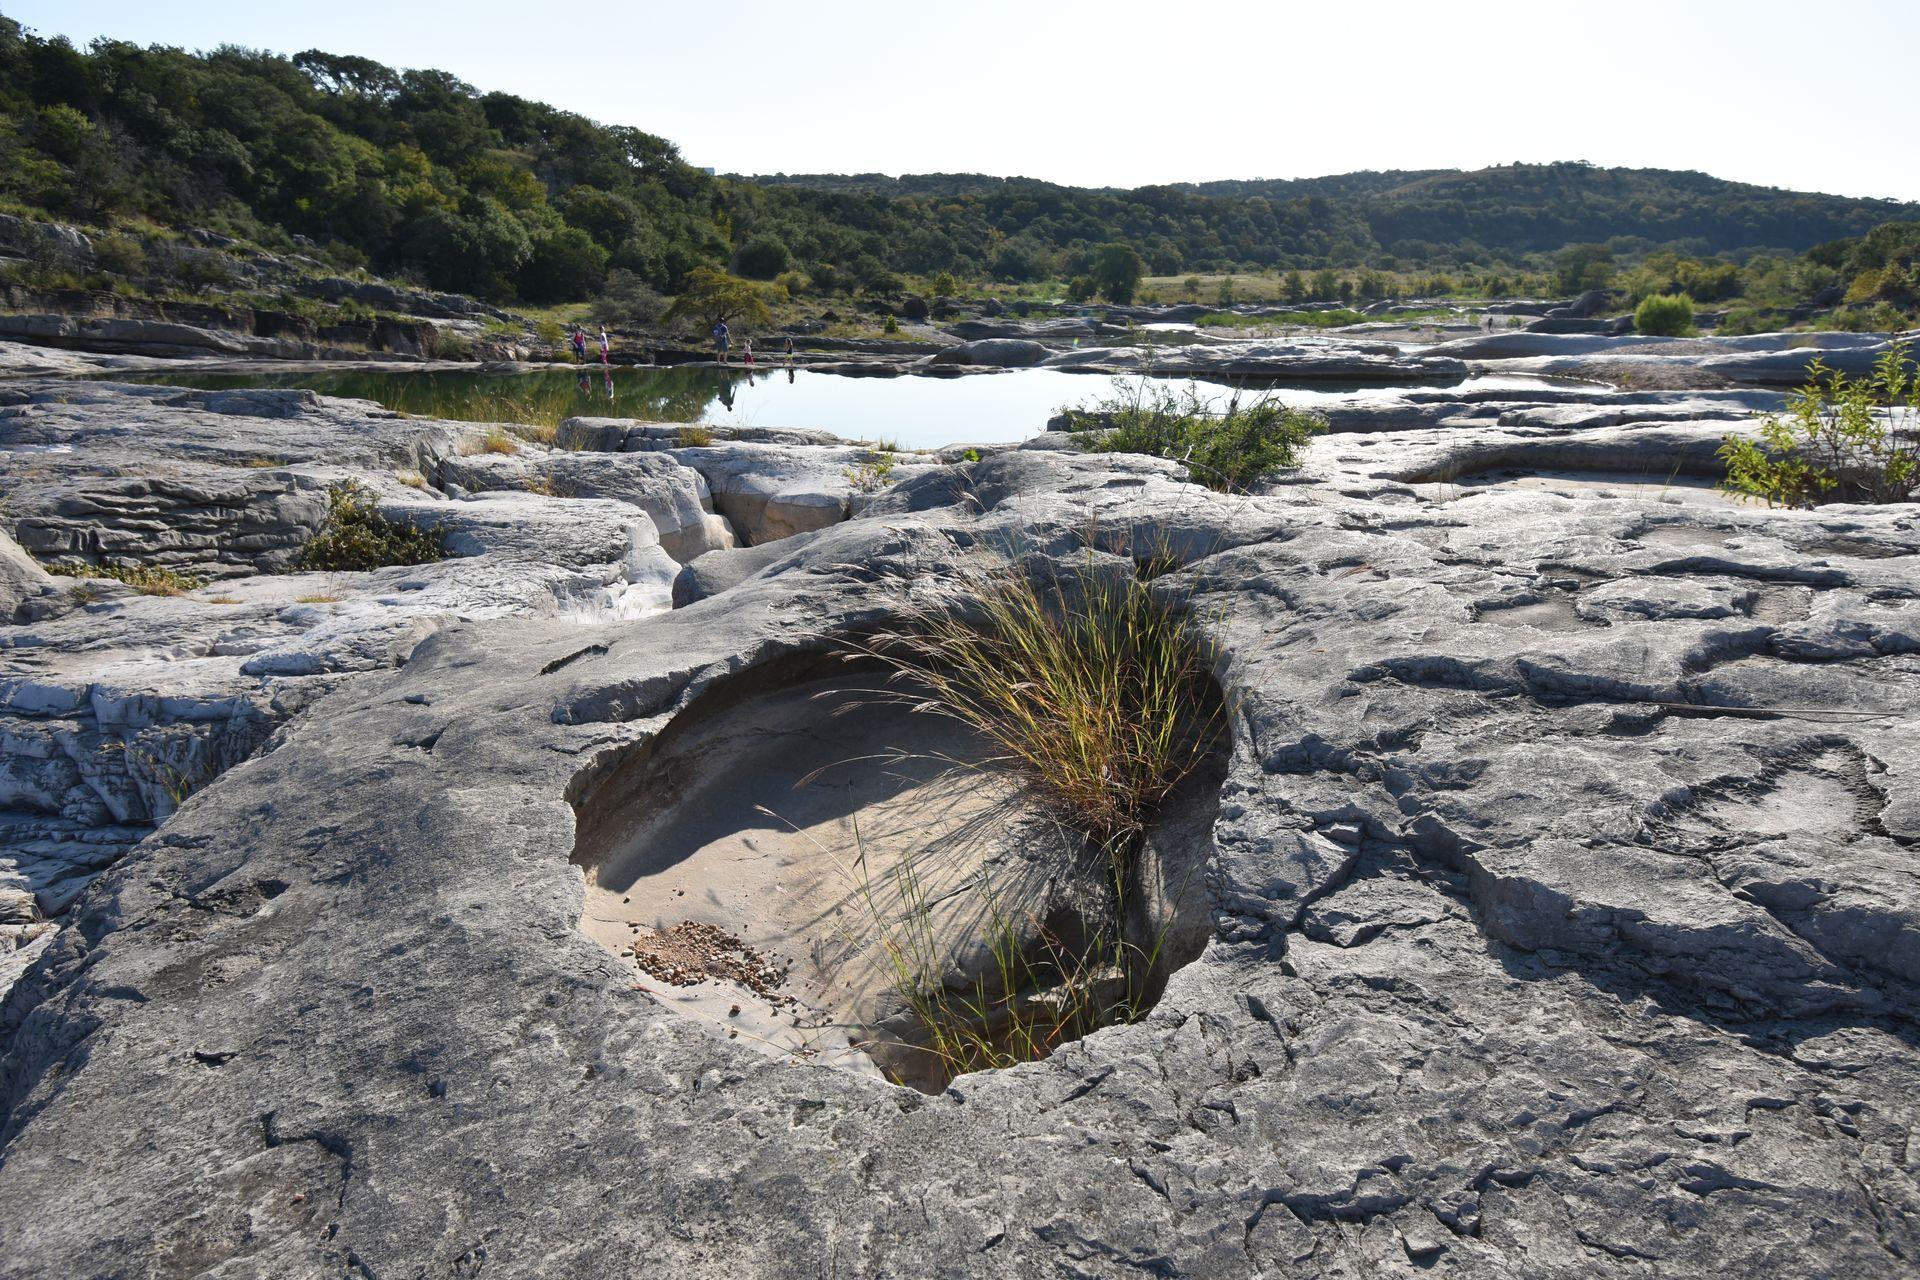 Limestone rocks with a plant growing through them at Pedernales Falls.